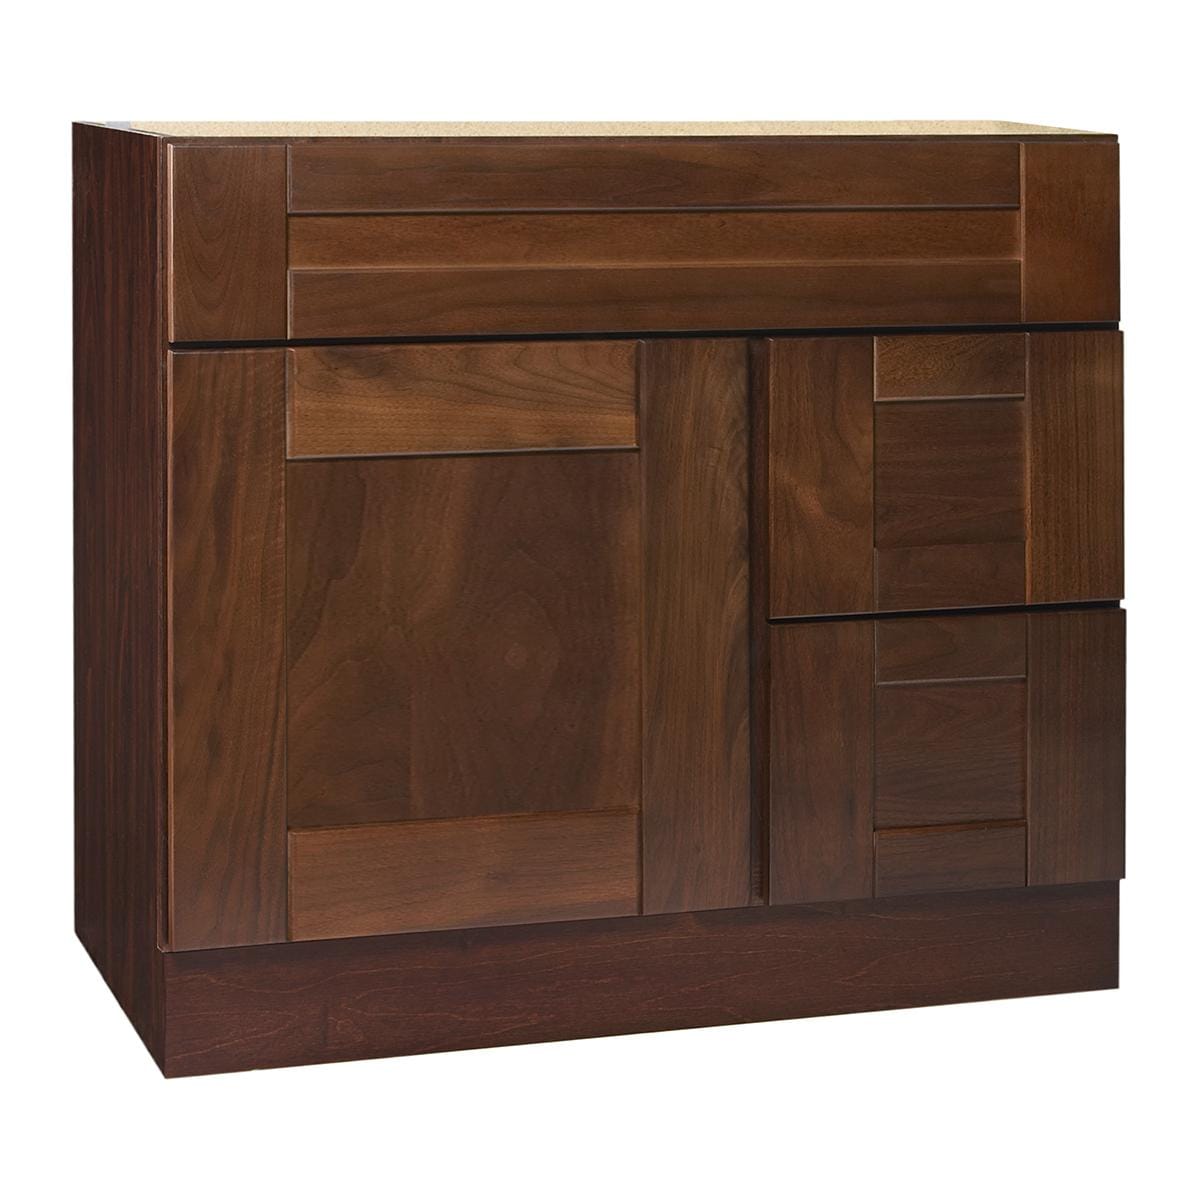 Georgetown Series 36x21 inch Vanity Base with Right side Drawers